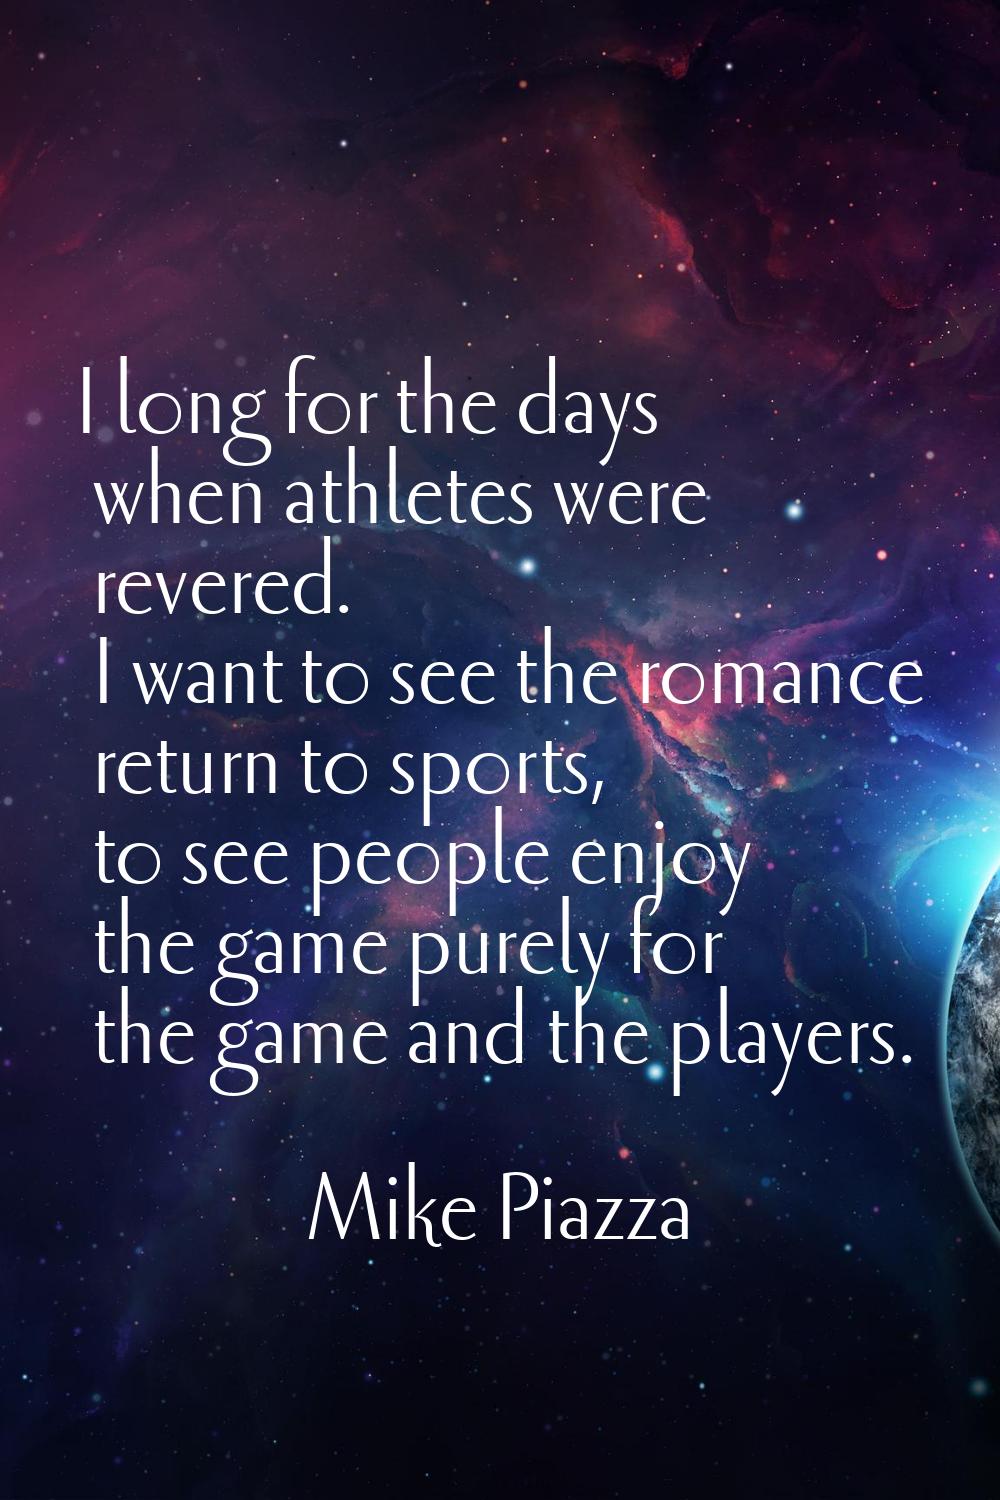 I long for the days when athletes were revered. I want to see the romance return to sports, to see 